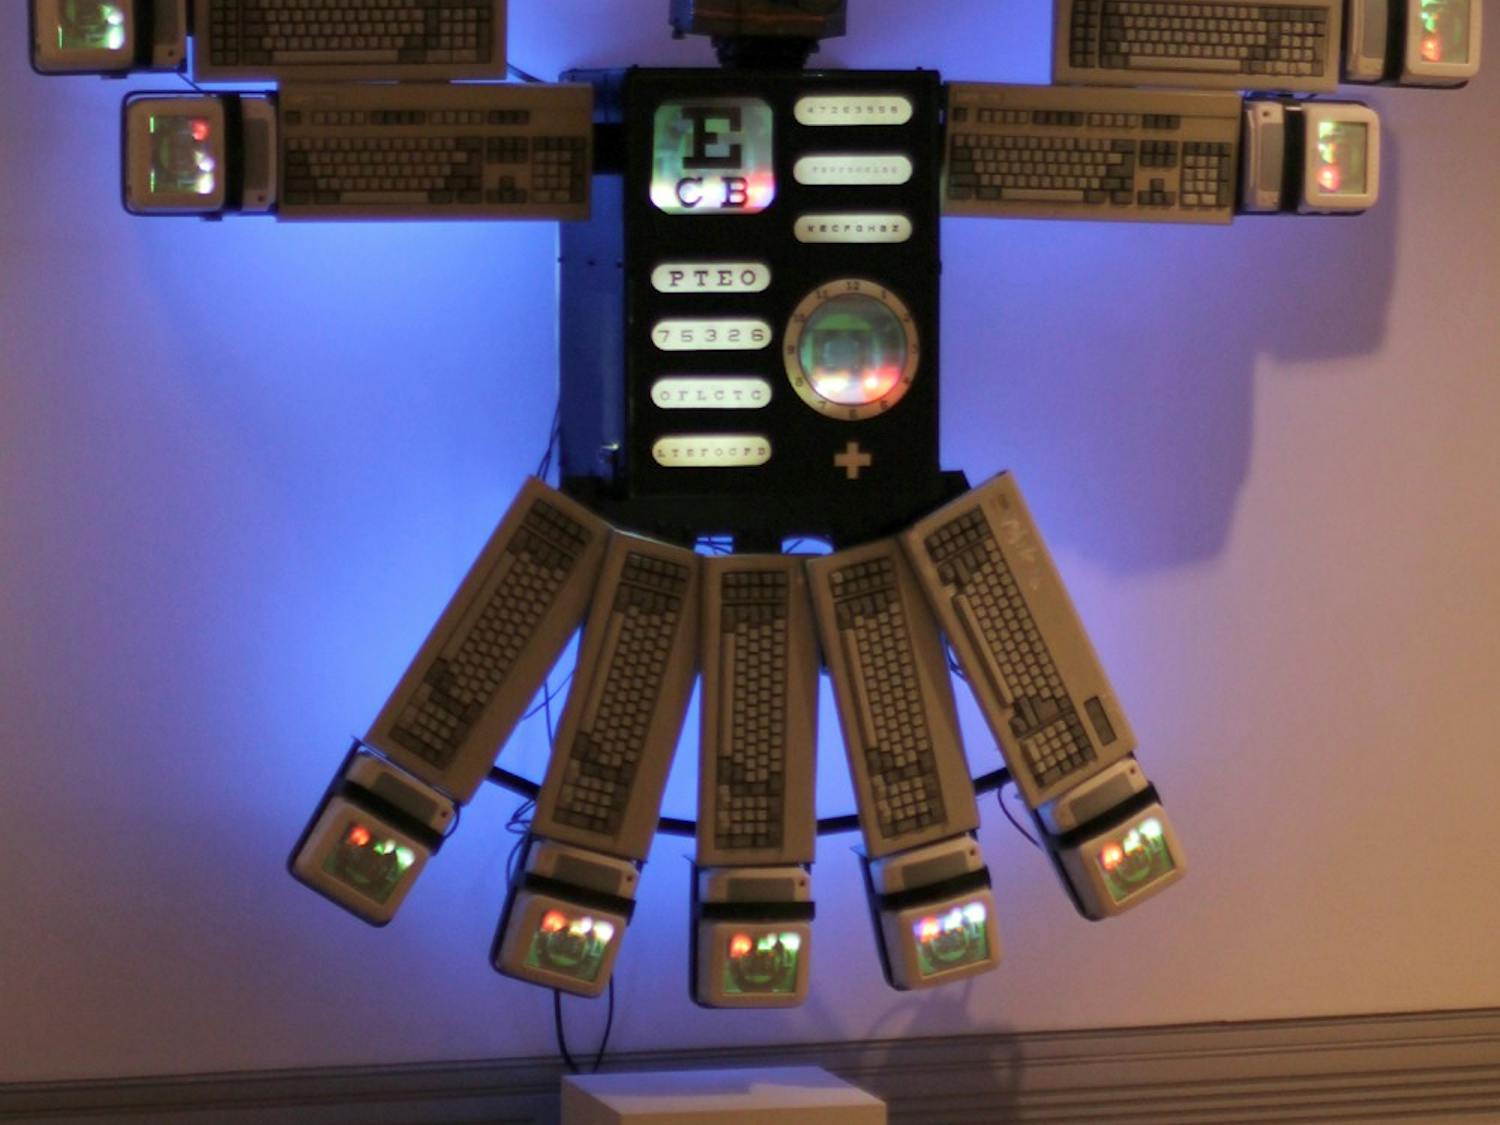 South Korean artist Nam June Paik’s piece “Eagle Eye” (pictured) is part of a show displayed in the Ackland for Geography 650.